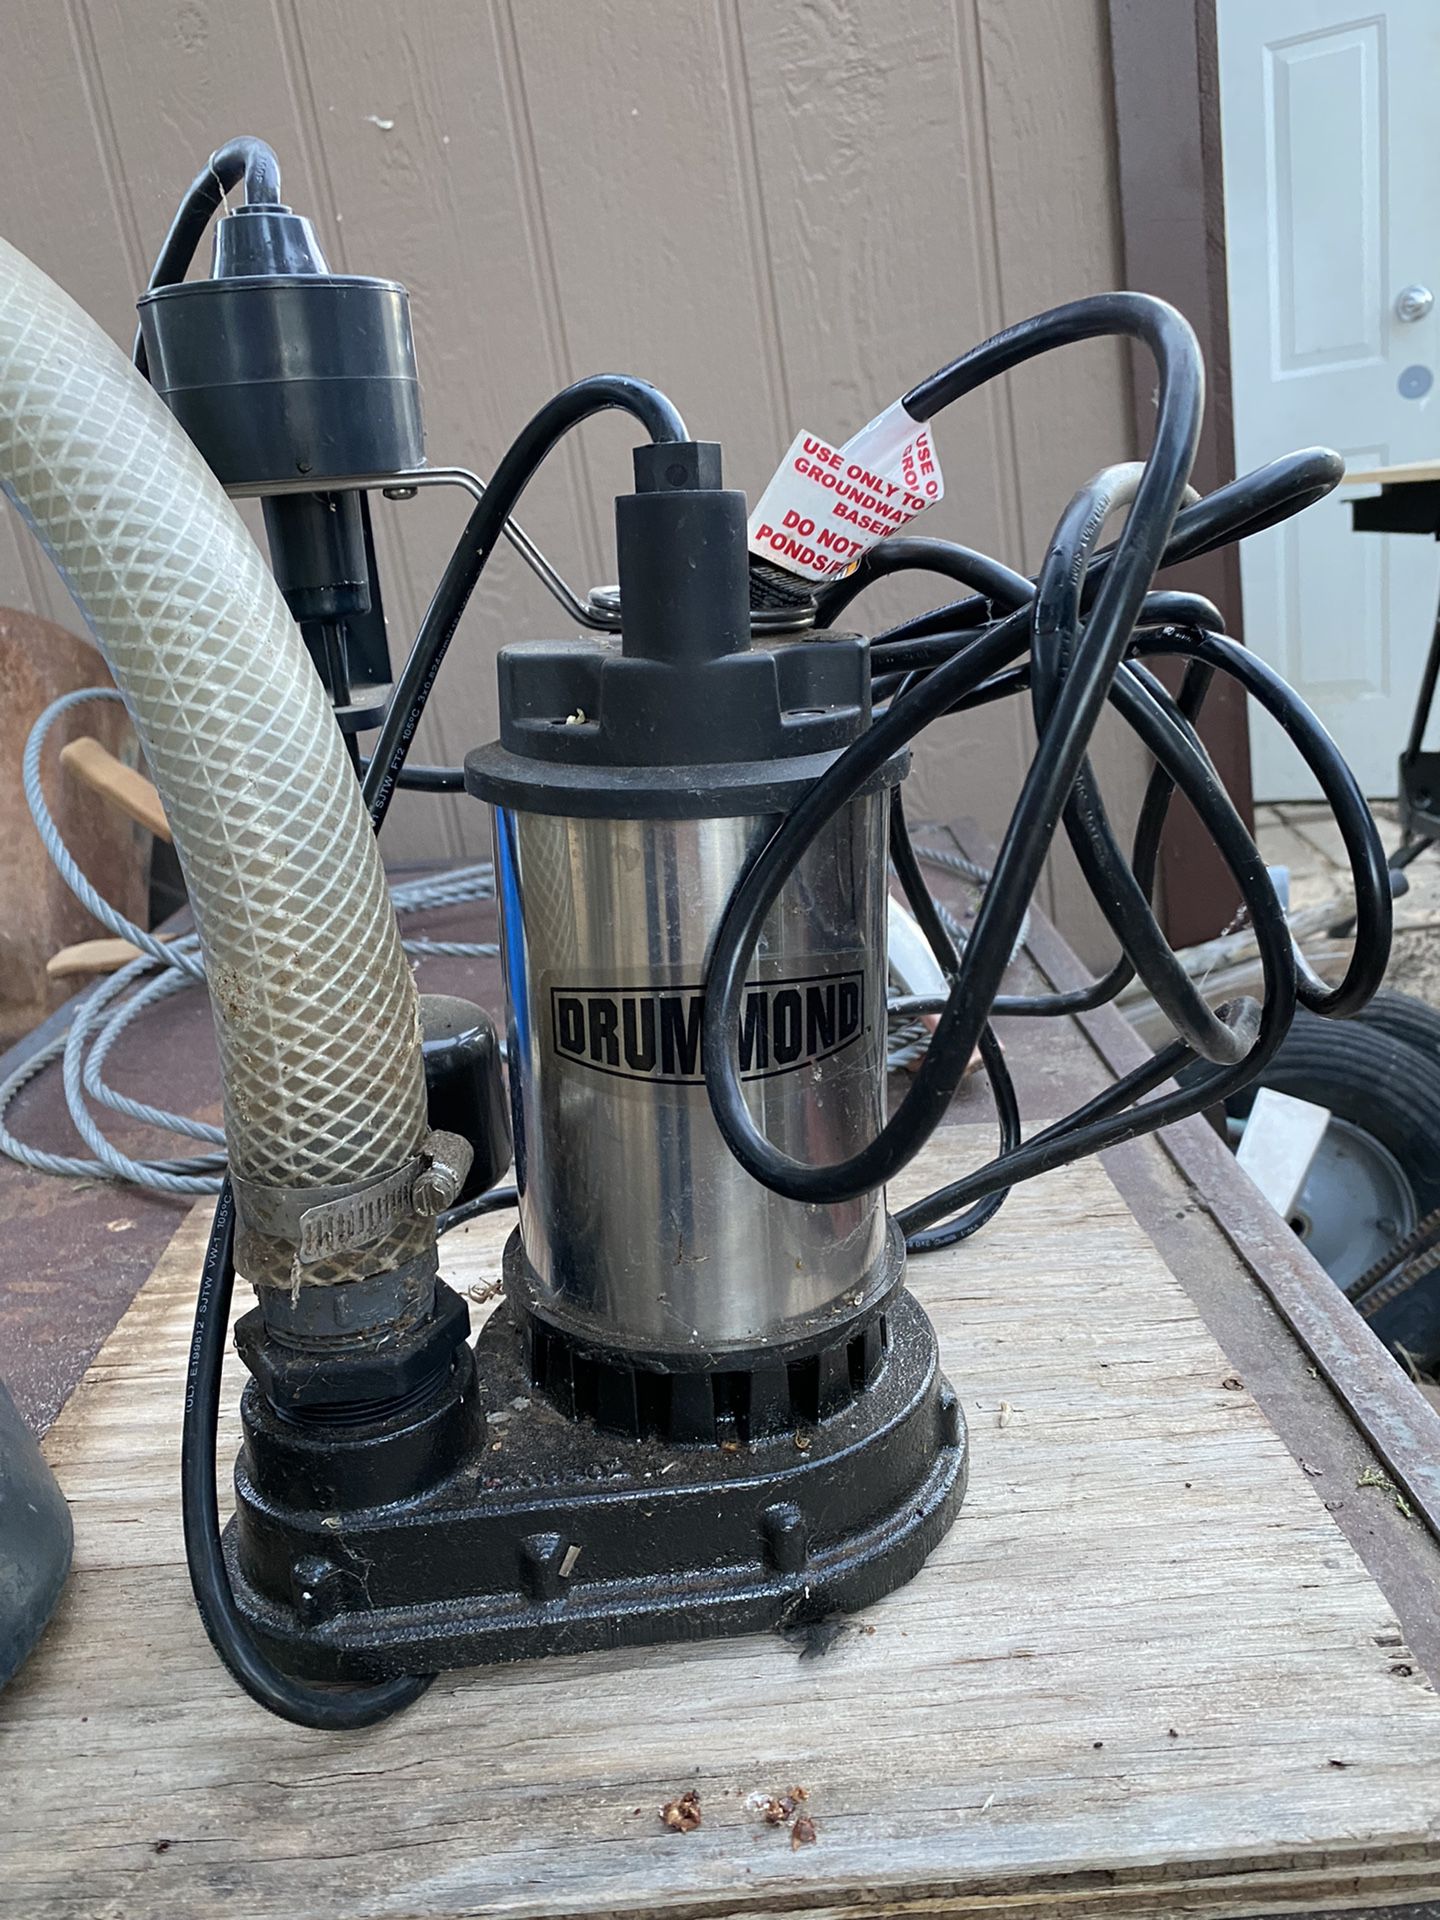 Submersible Pumps, Drummond 1/2 Hp